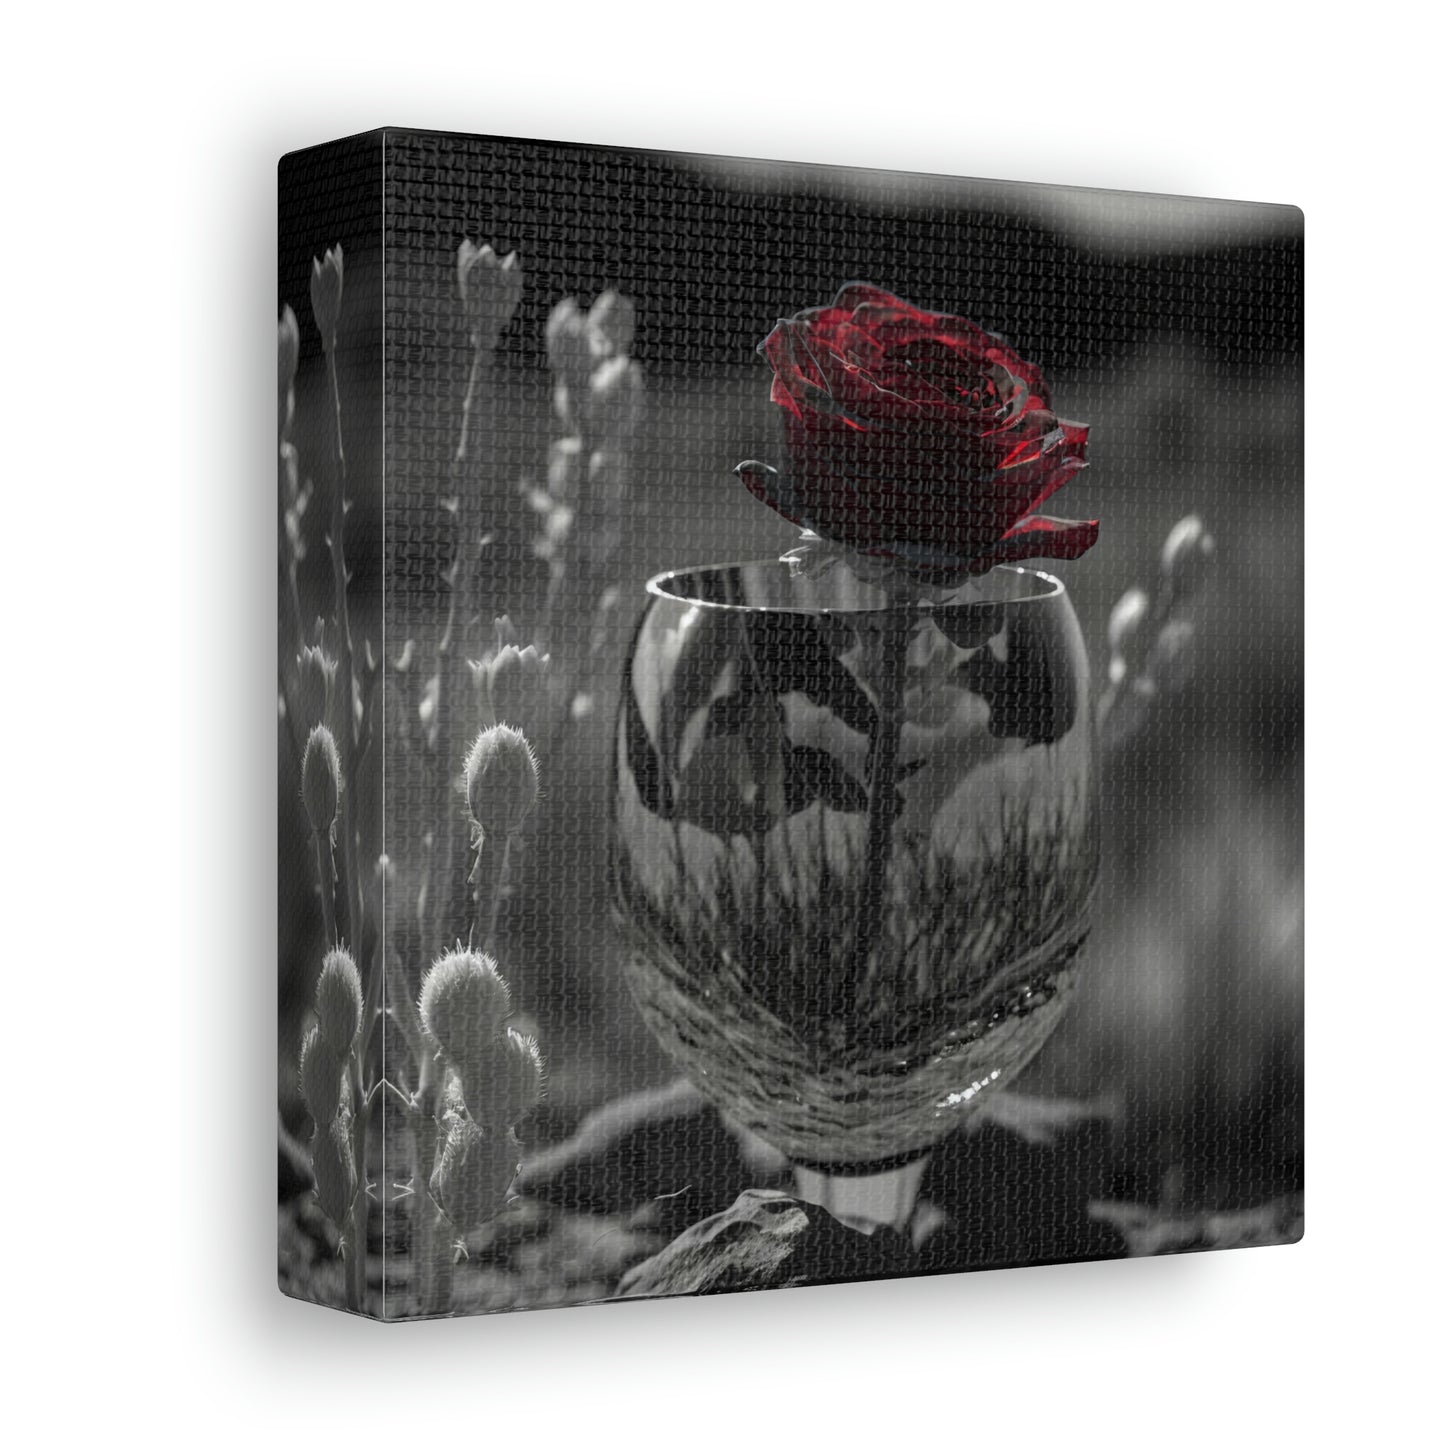 Red Rose Glass 0